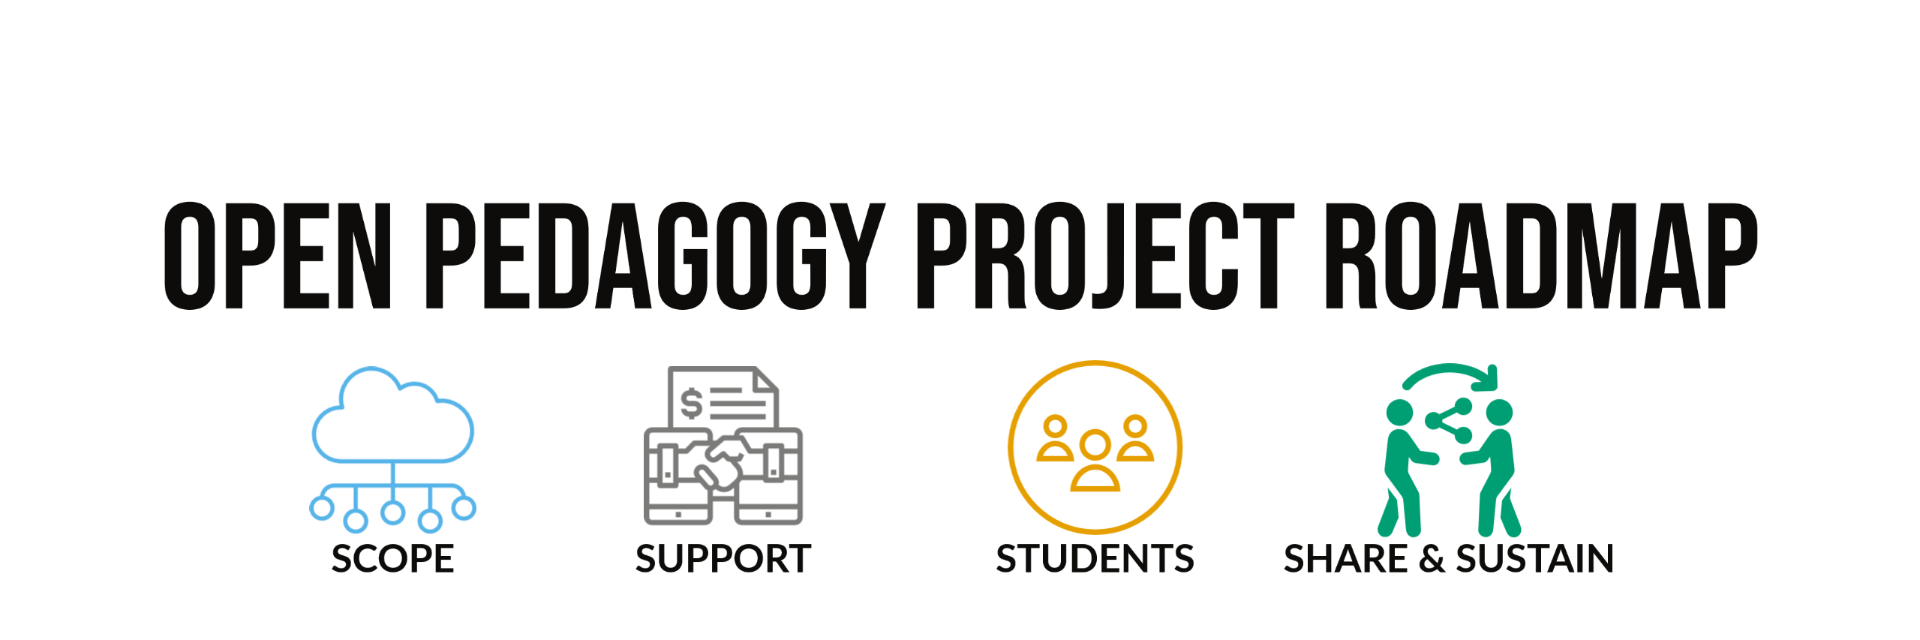 The Open Pedagogy Project Roadmap has four icons below the heading. Below each of the icons from left to right are the words Scope, Support, Students, Share & Sustain.